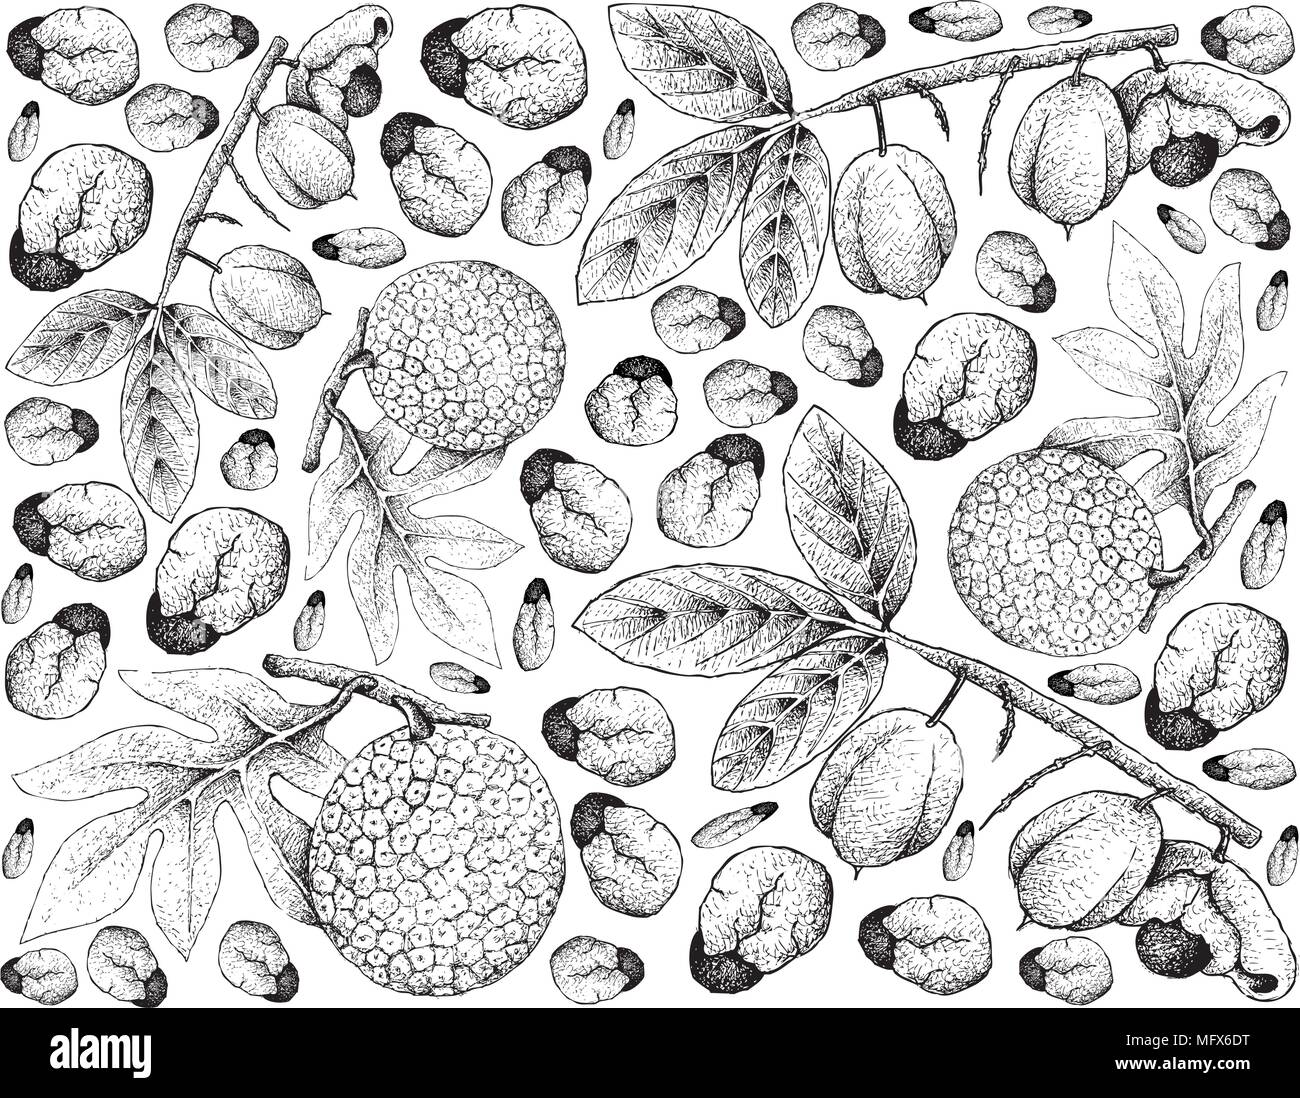 Tropical Fruits, Illustration Wallpaper Background of Hand Drawn Sketch of Ackee or Blighia Sapida and Breadfruit or Artocarpus Altilis Fruits. Stock Vector